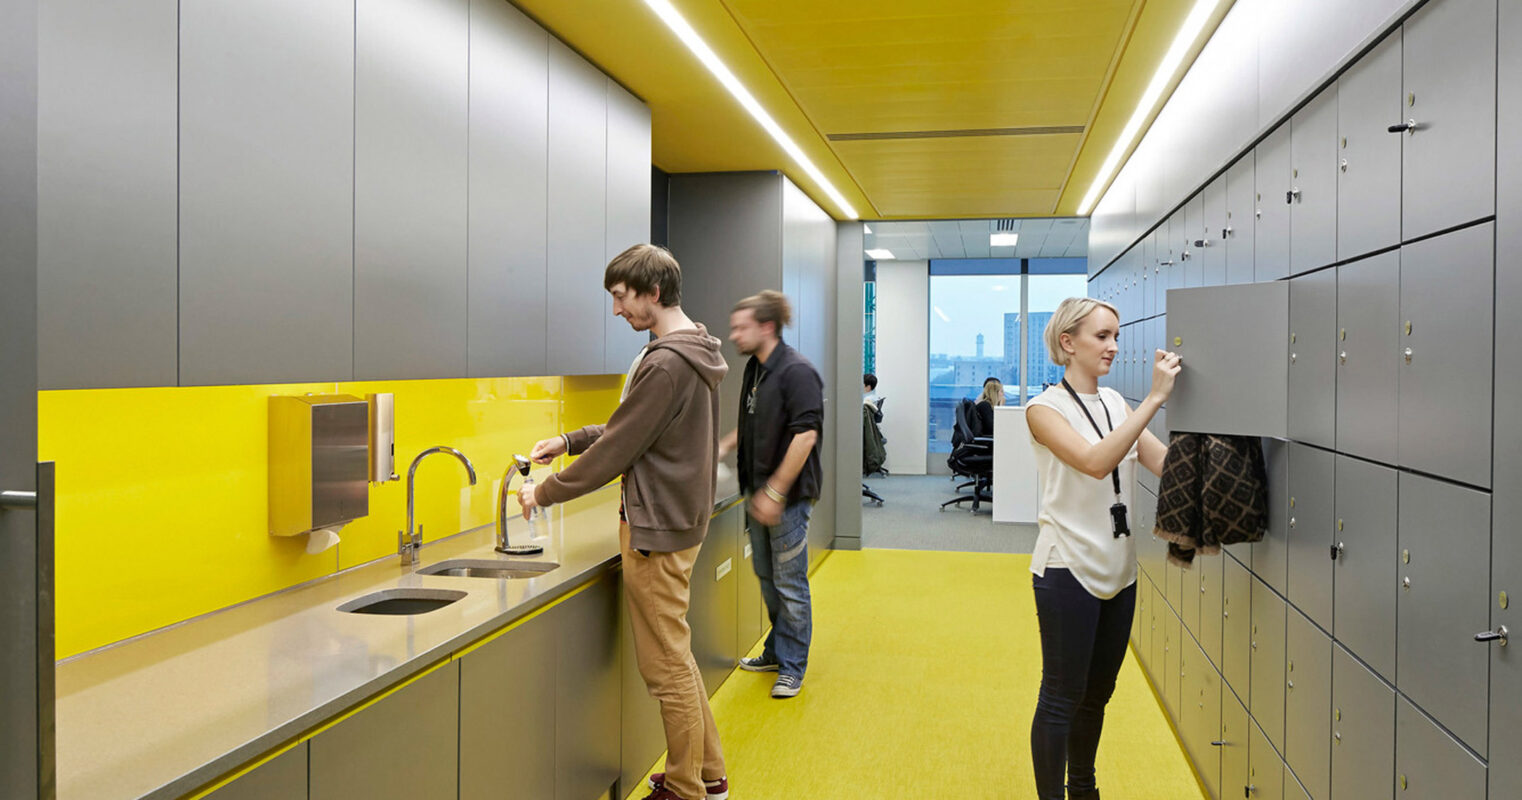 Modern office break room featuring lemon-yellow accents in backsplash and flooring, with sleek gray cabinetry and stainless steel fixtures. Natural light permeates the space, enhancing the vibrant color scheme and clean lines. Individuals engage casually, adding a dynamic element to the functional design.